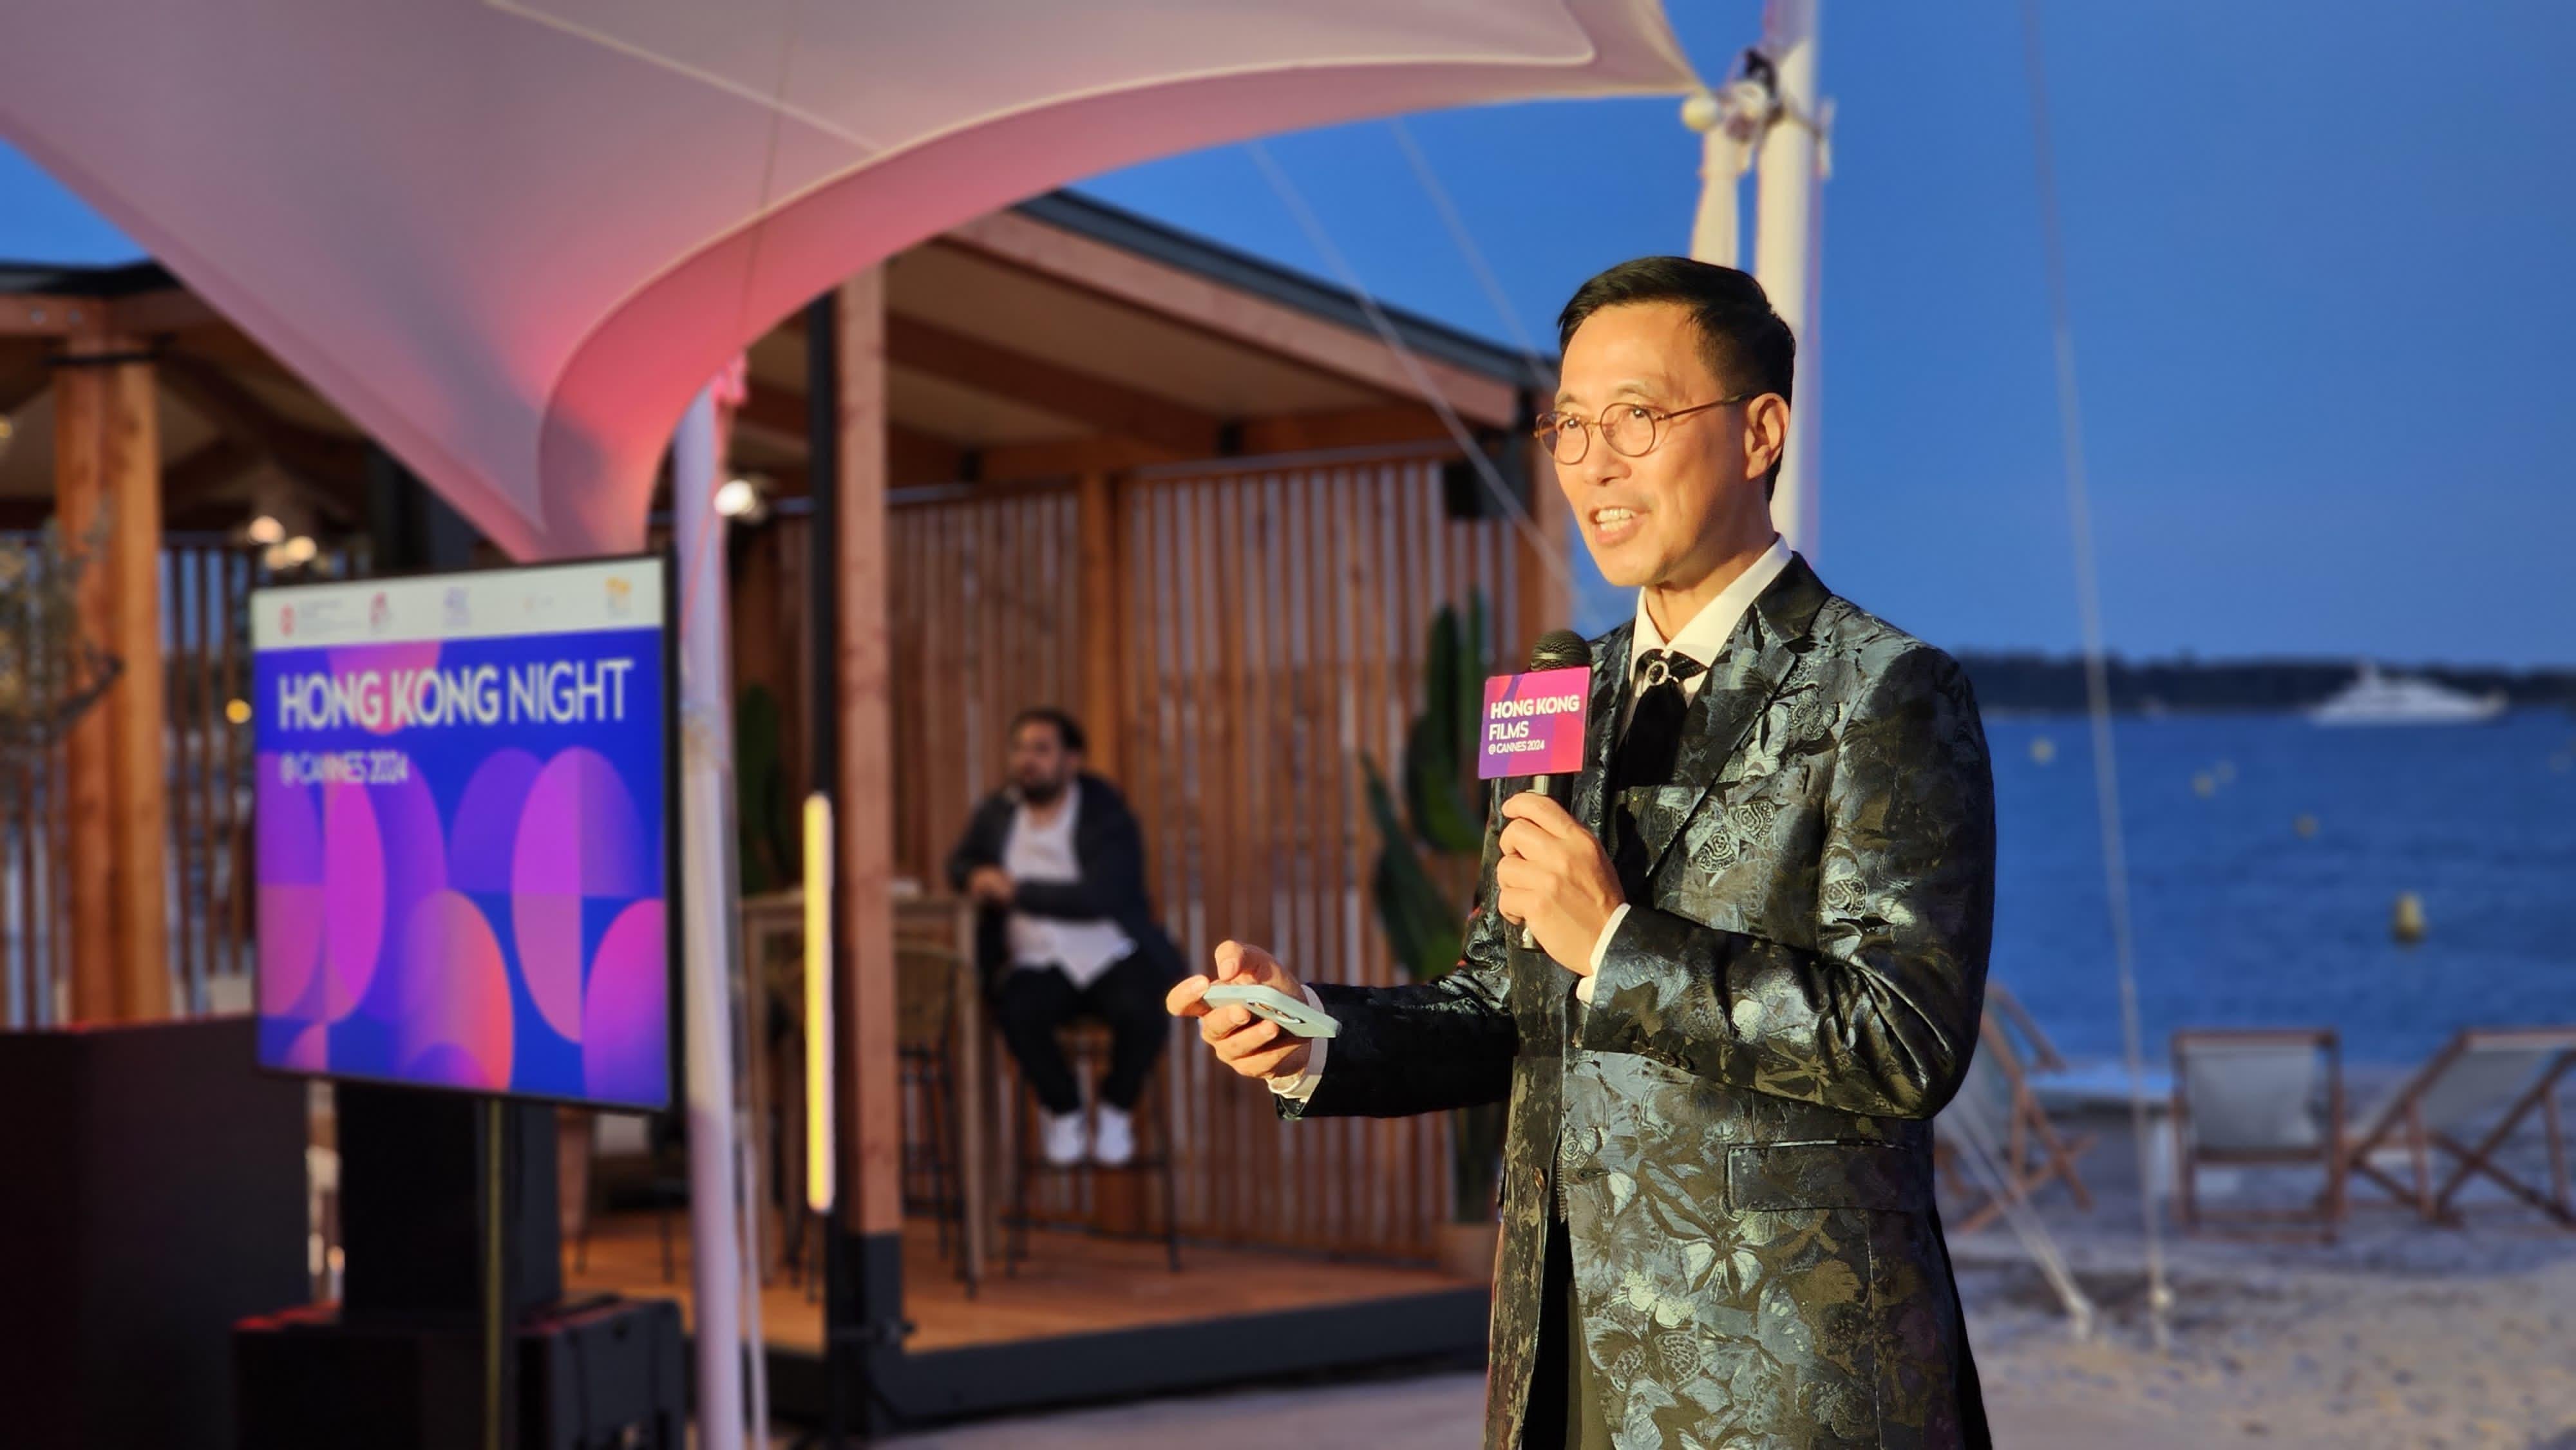 The Secretary for Culture, Sports and Tourism, Mr Kevin Yeung, yesterday (May 16, Cannes time) speaks at the Hong Kong Night reception in the 77th Cannes Film Festival.